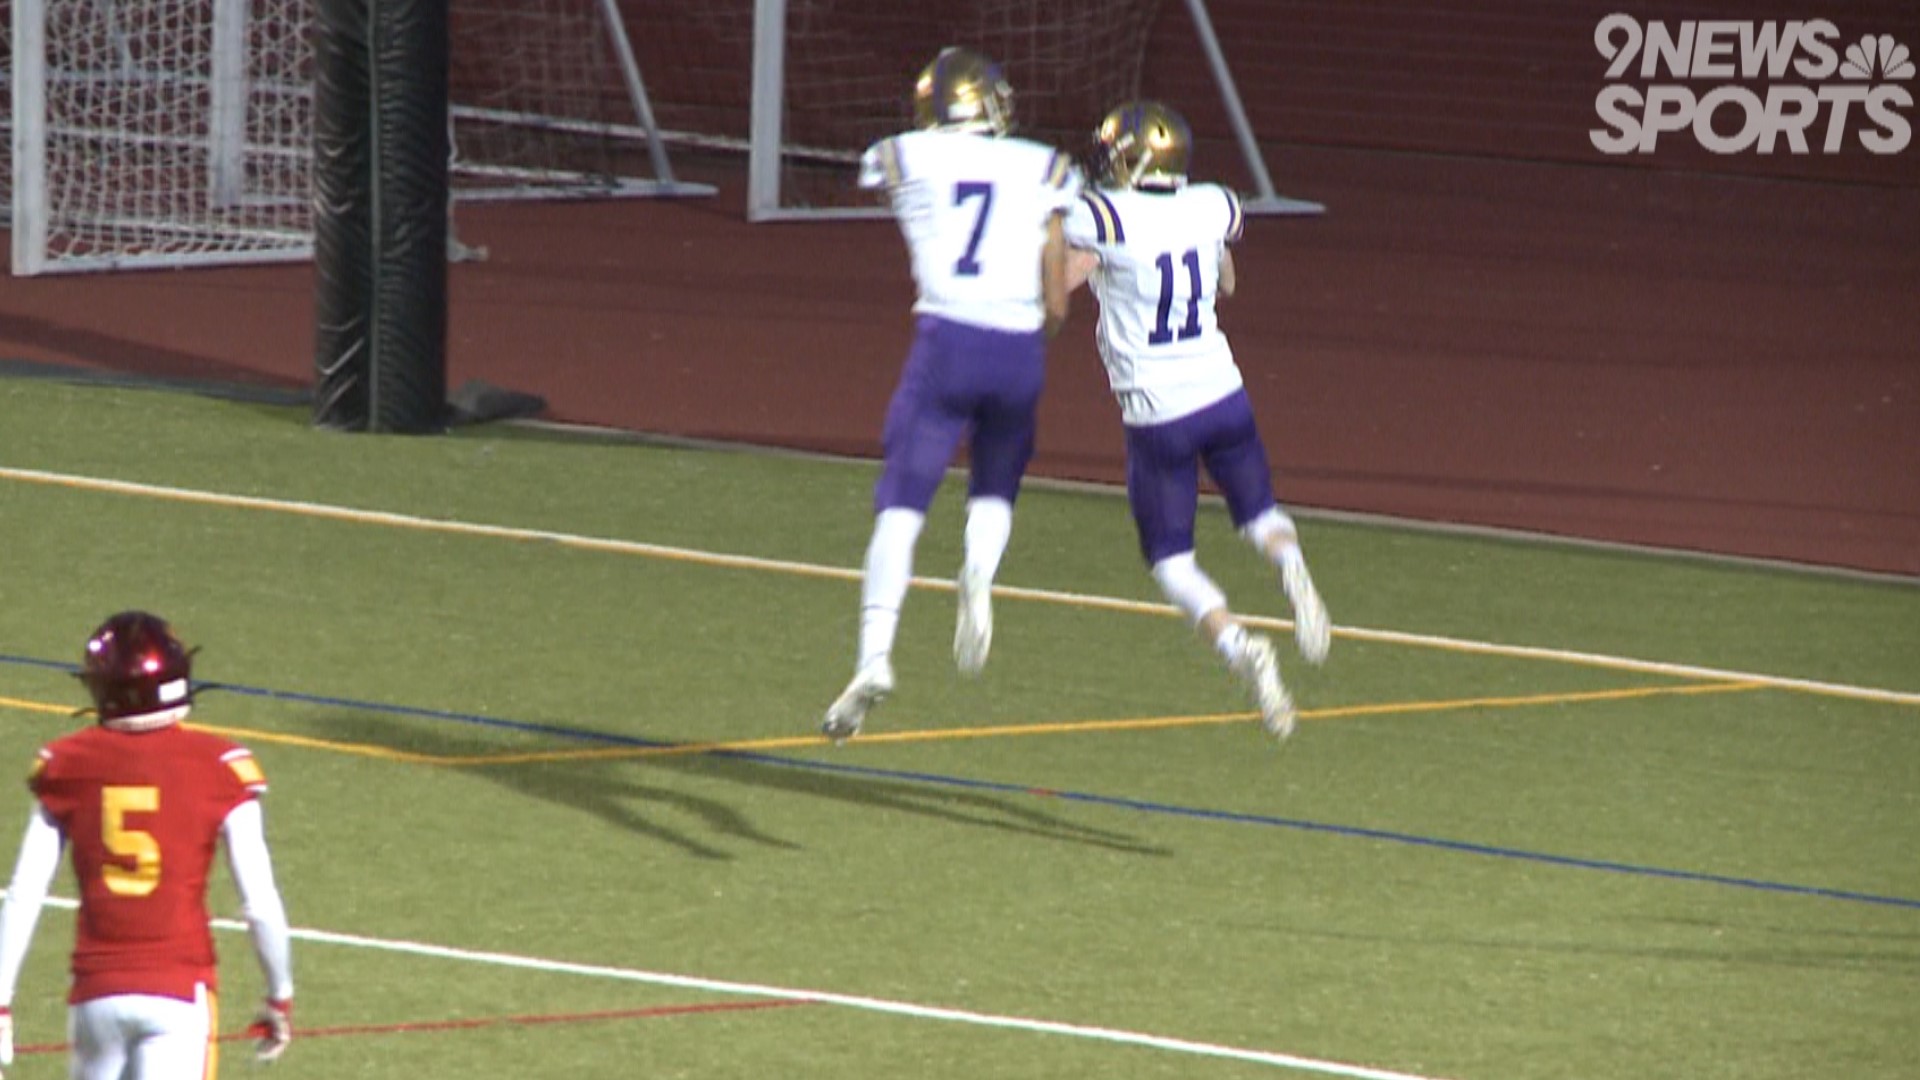 The Lambkins defeated the Norsemen 52-14 on Thursday night.